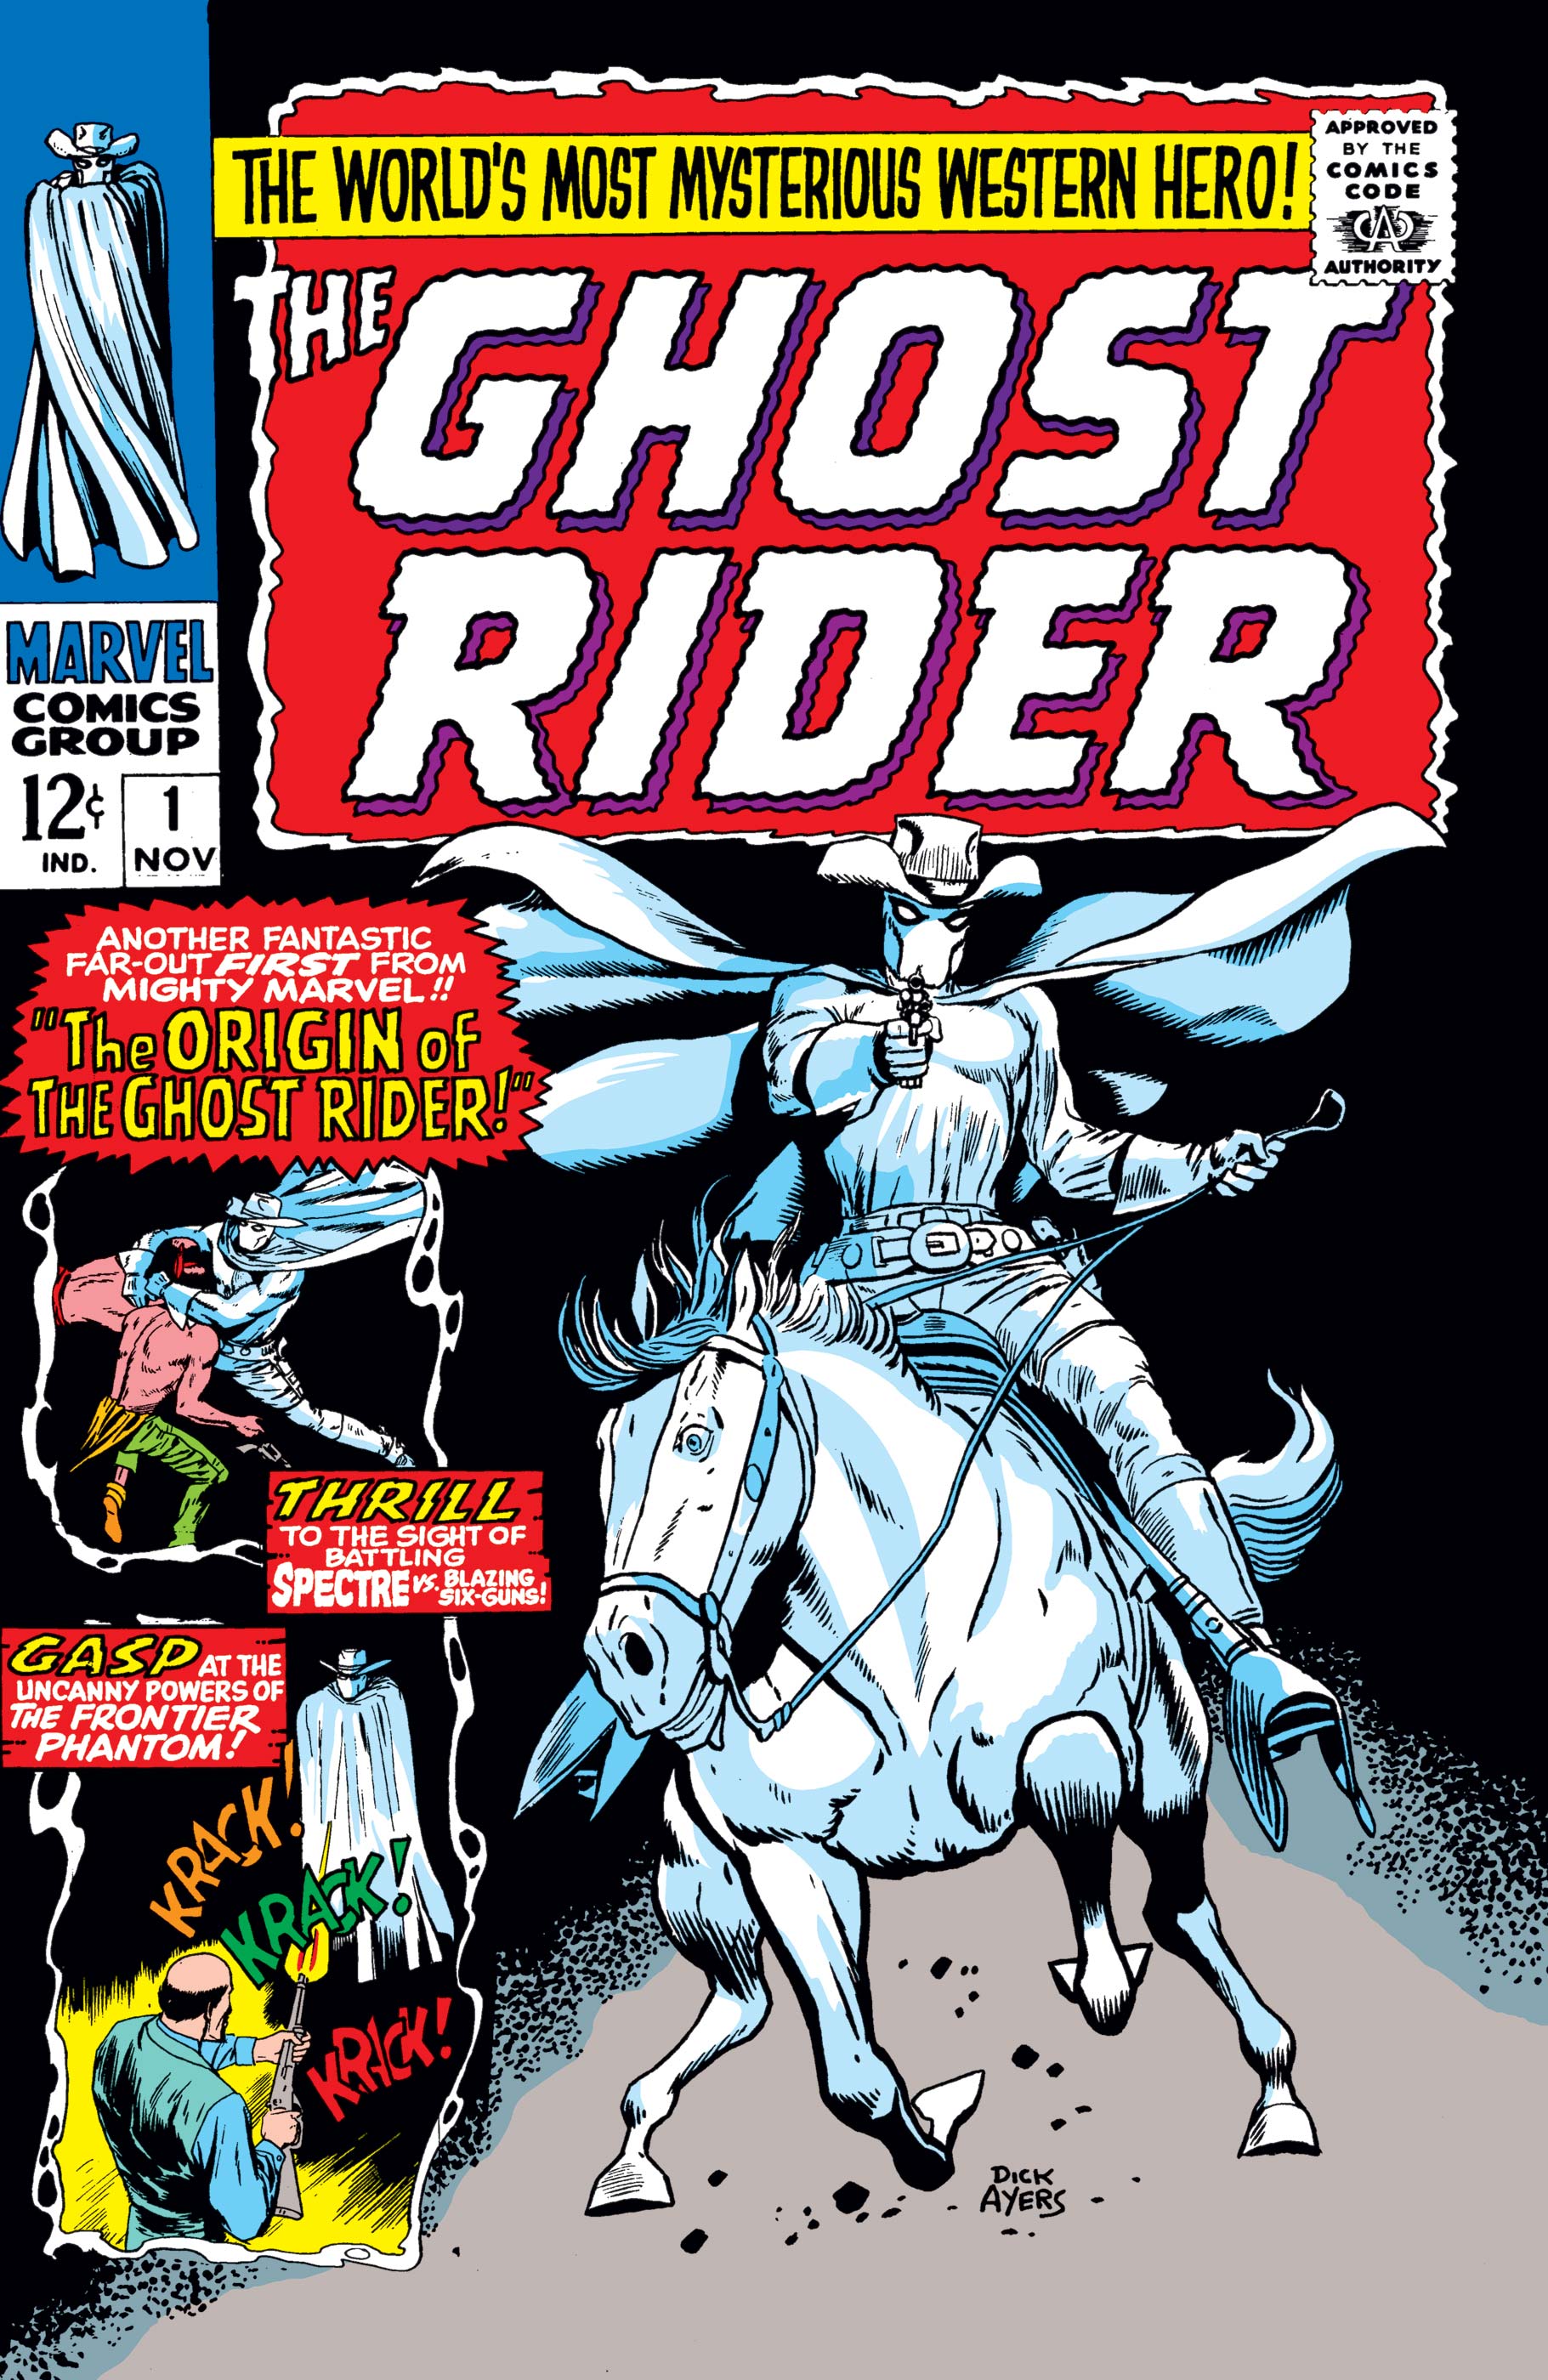 The Ghost Rider (1967) #1